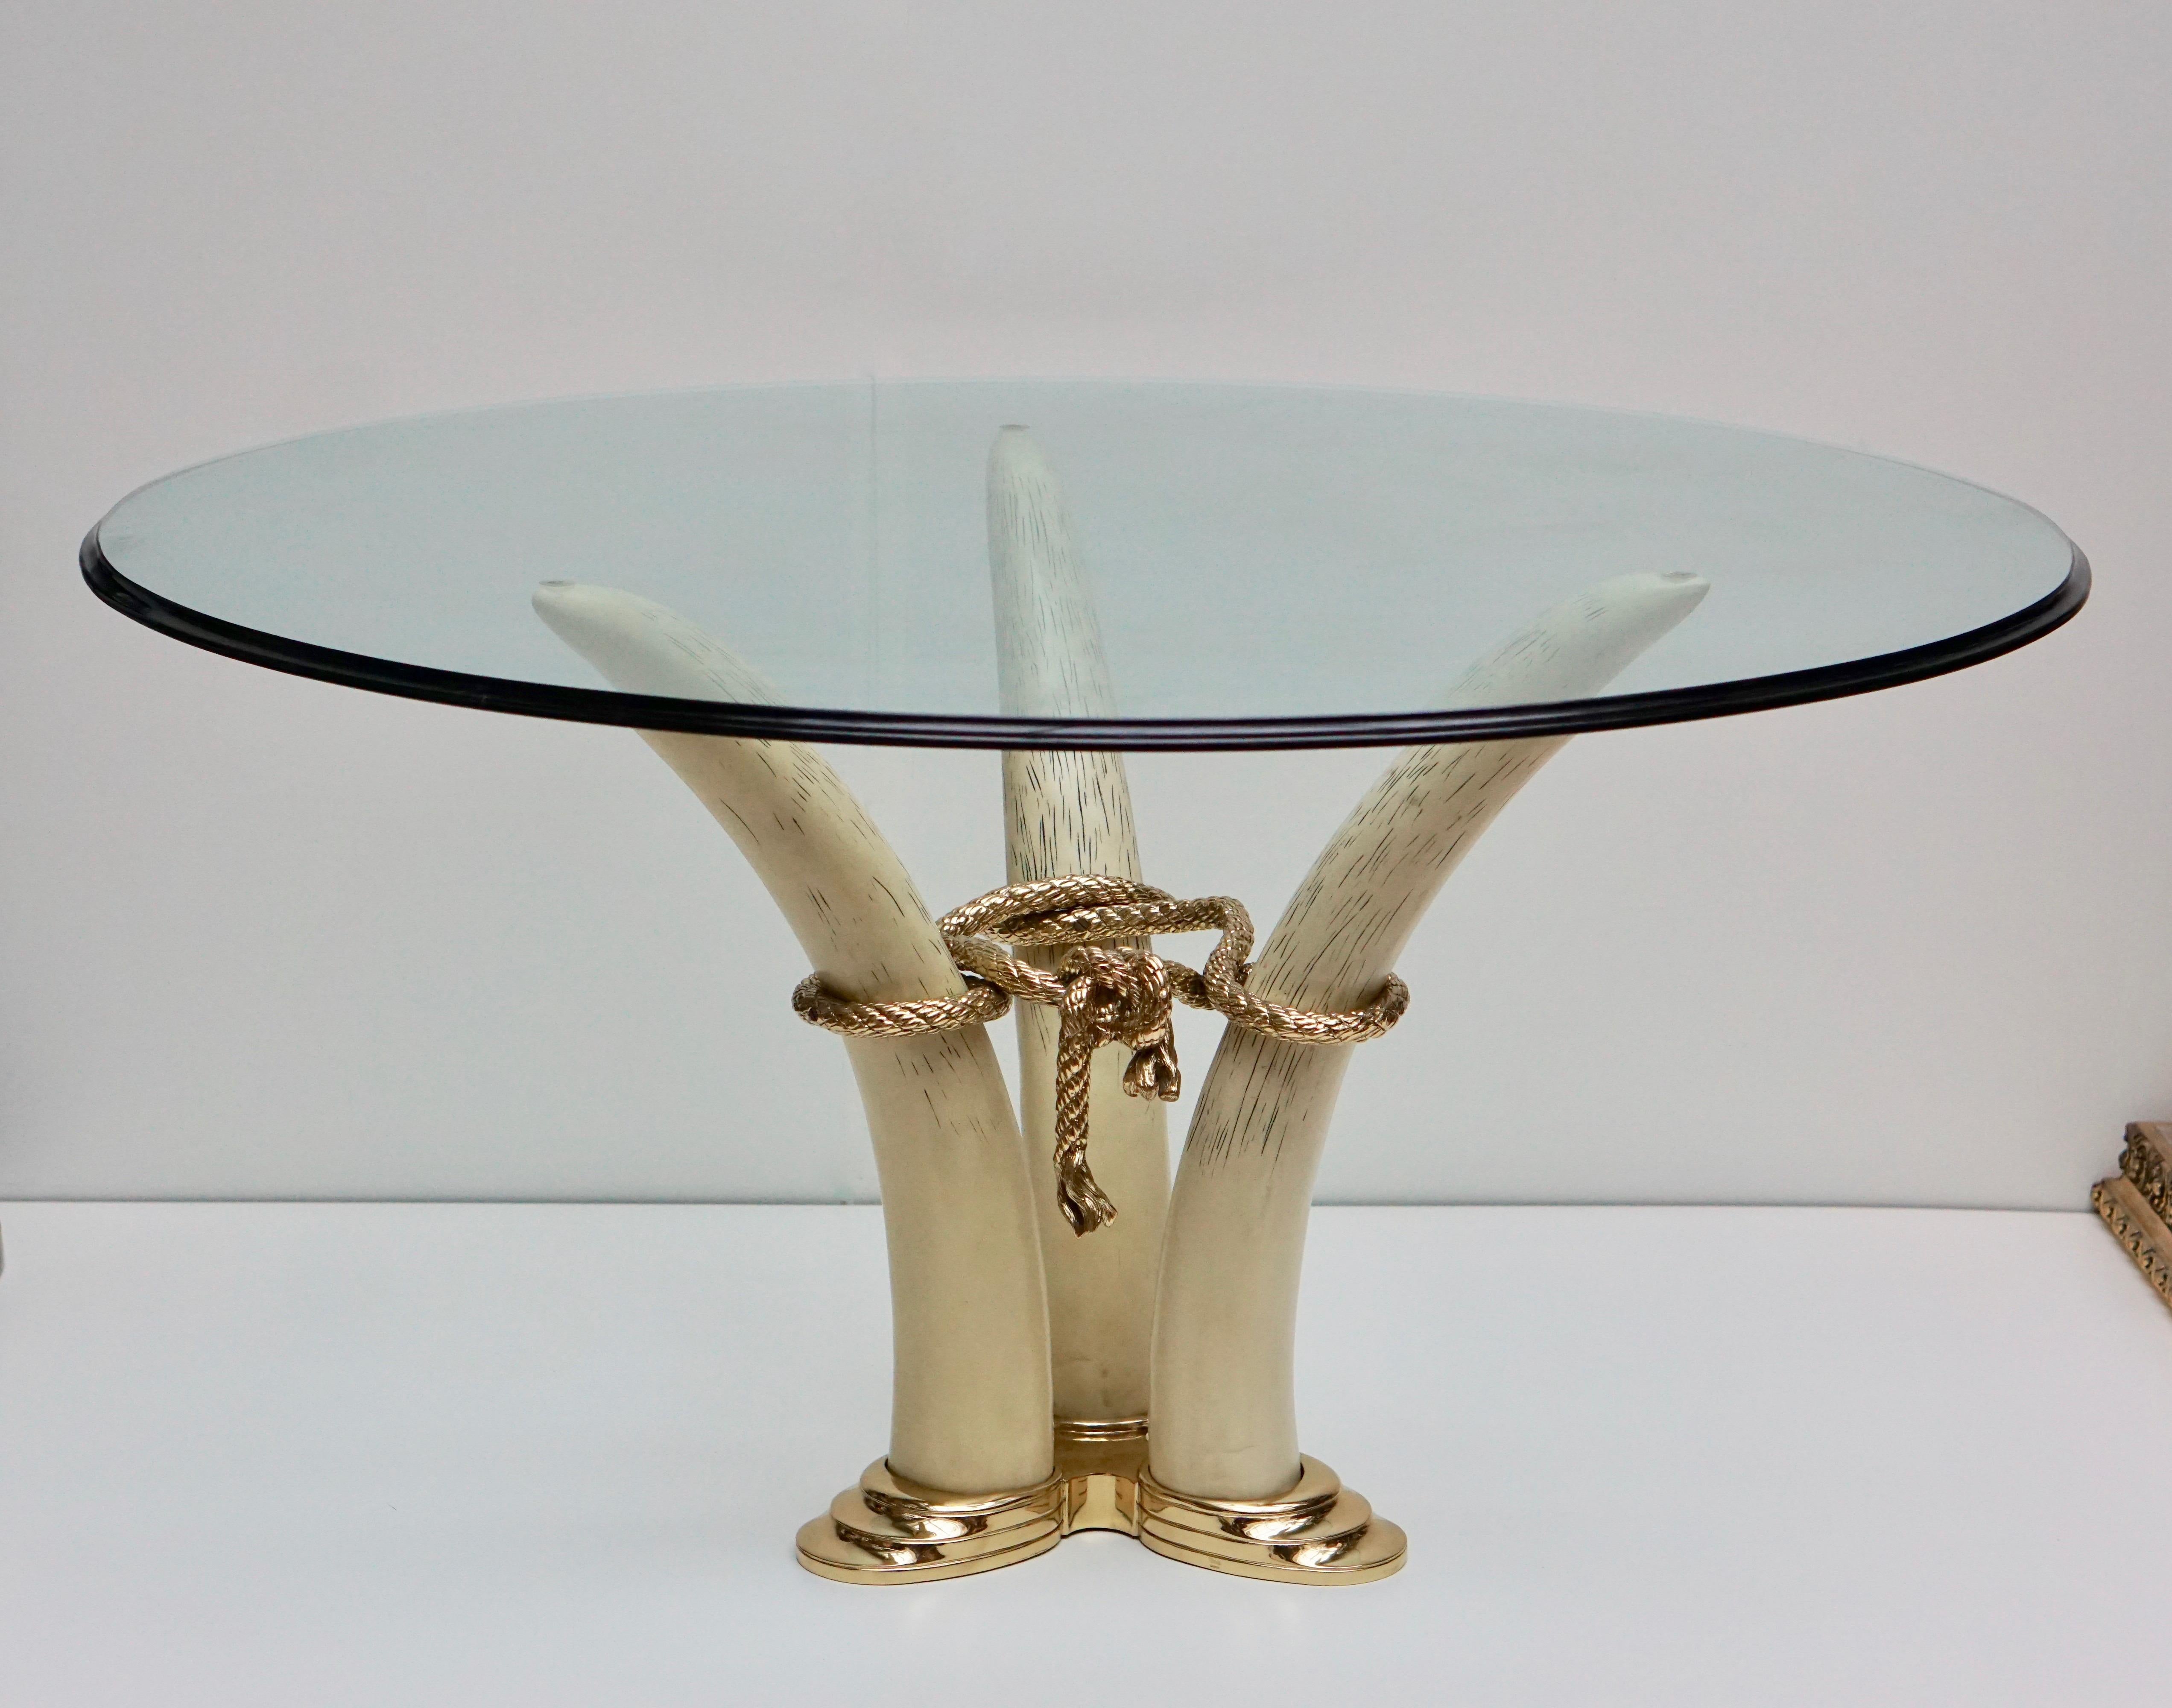 20th Century Hollywood Regency Dining Table by Valenti, Barcelona, Spain, circa 1970-1980 For Sale